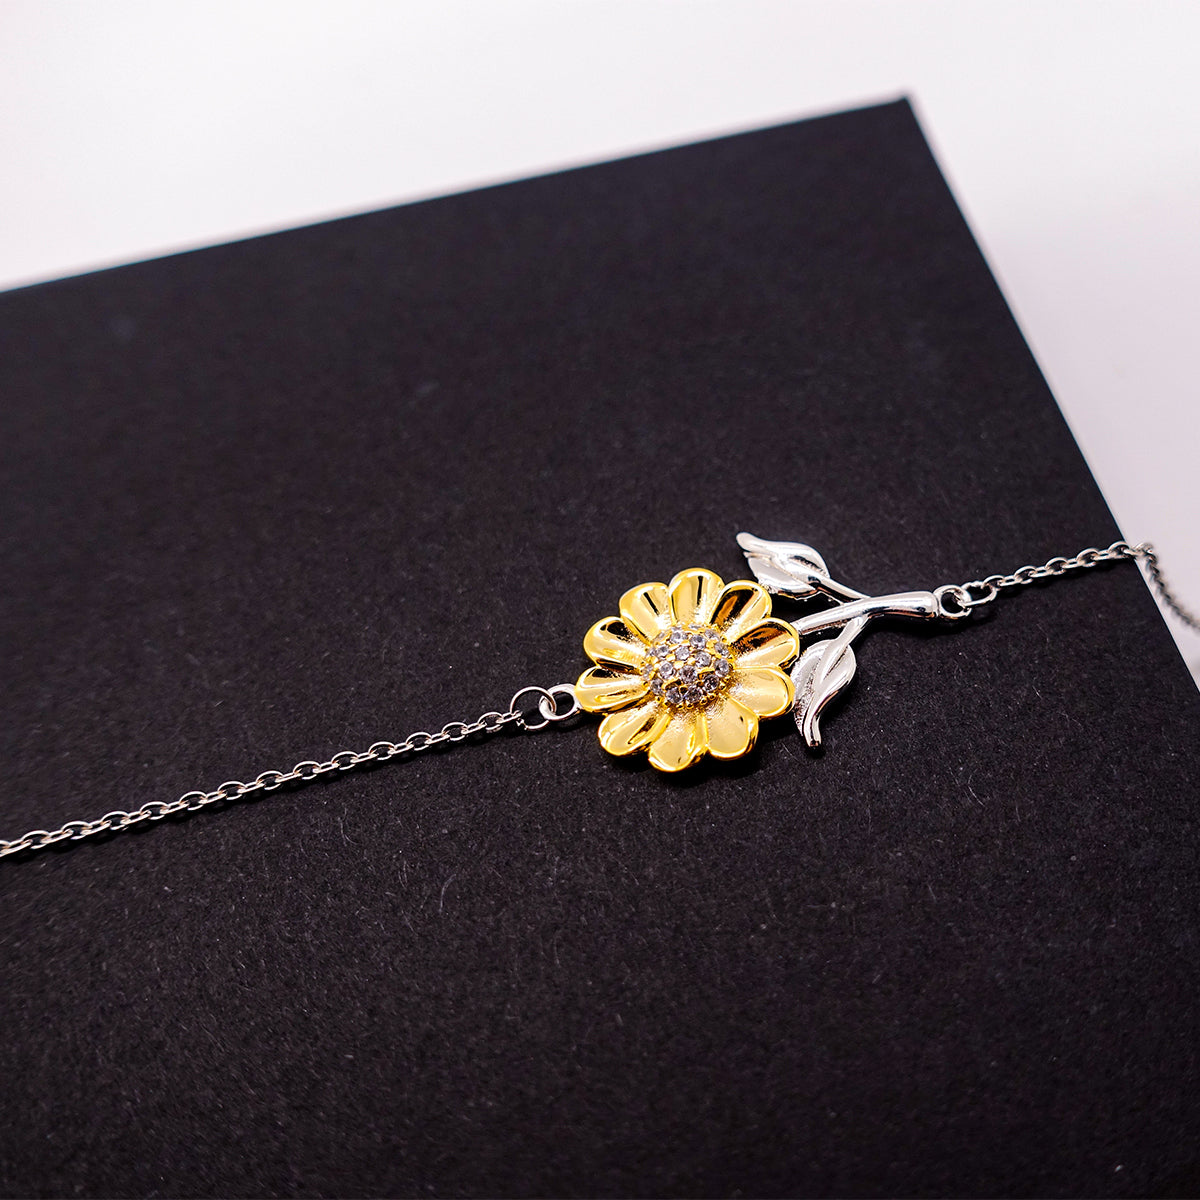 Appropriate Brother In Law Sunflower Bracelet Epic Birthday Gifts for Brother In Law Thank you for being such an important piece of my life Brother In Law Christmas Mothers Fathers Day